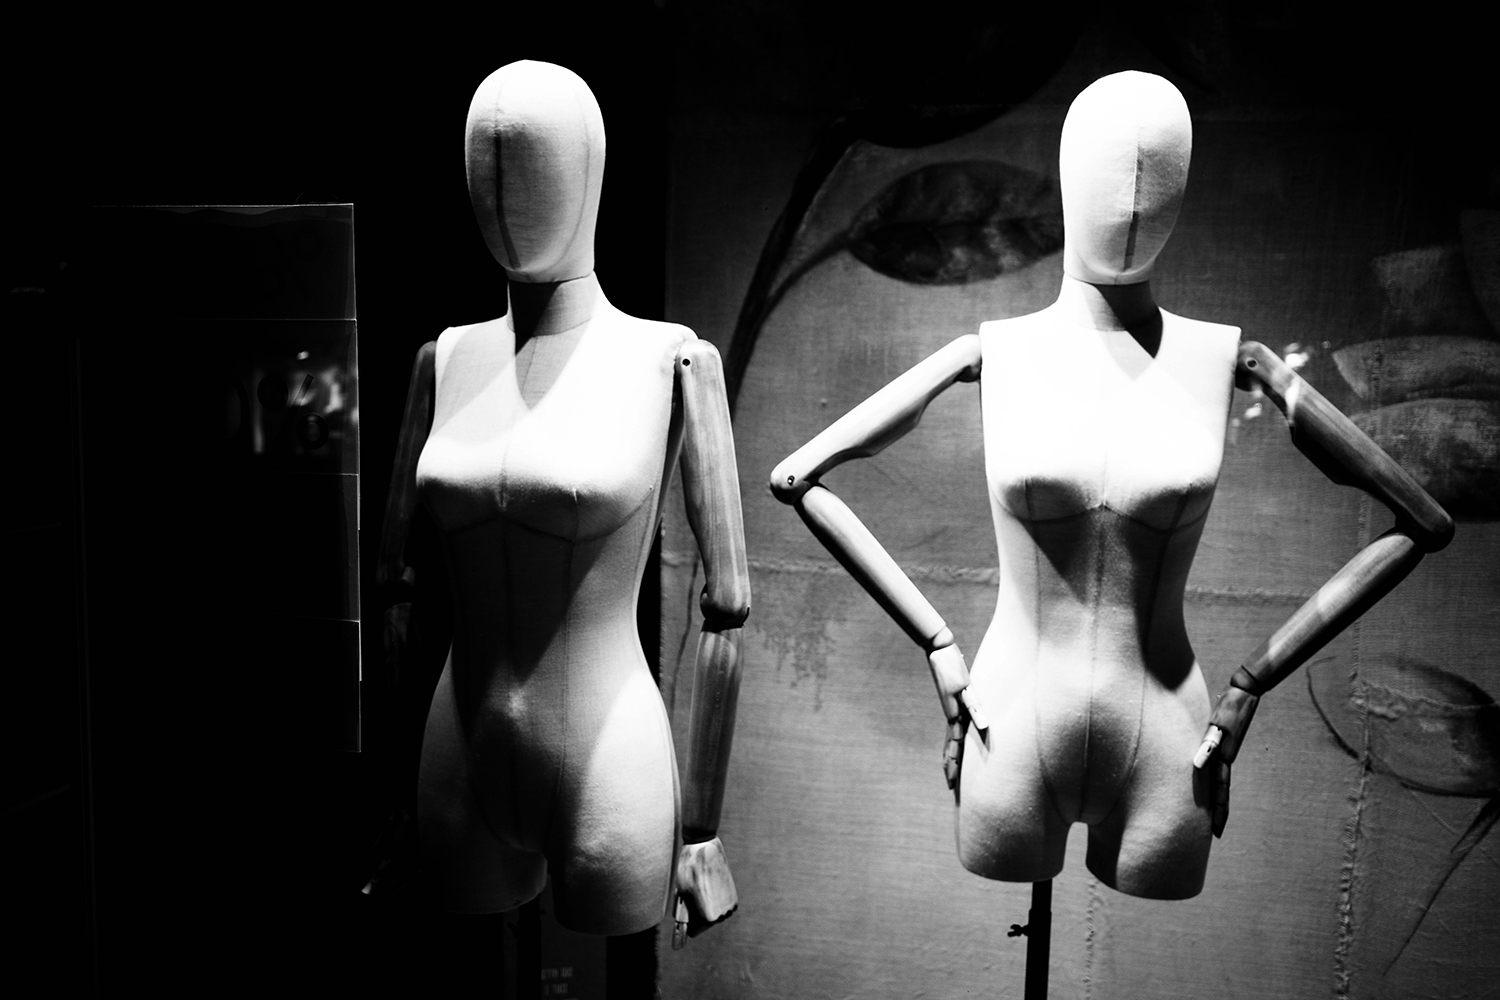 <p>An impressive amount of sass from two minimalist mannequins.</p>